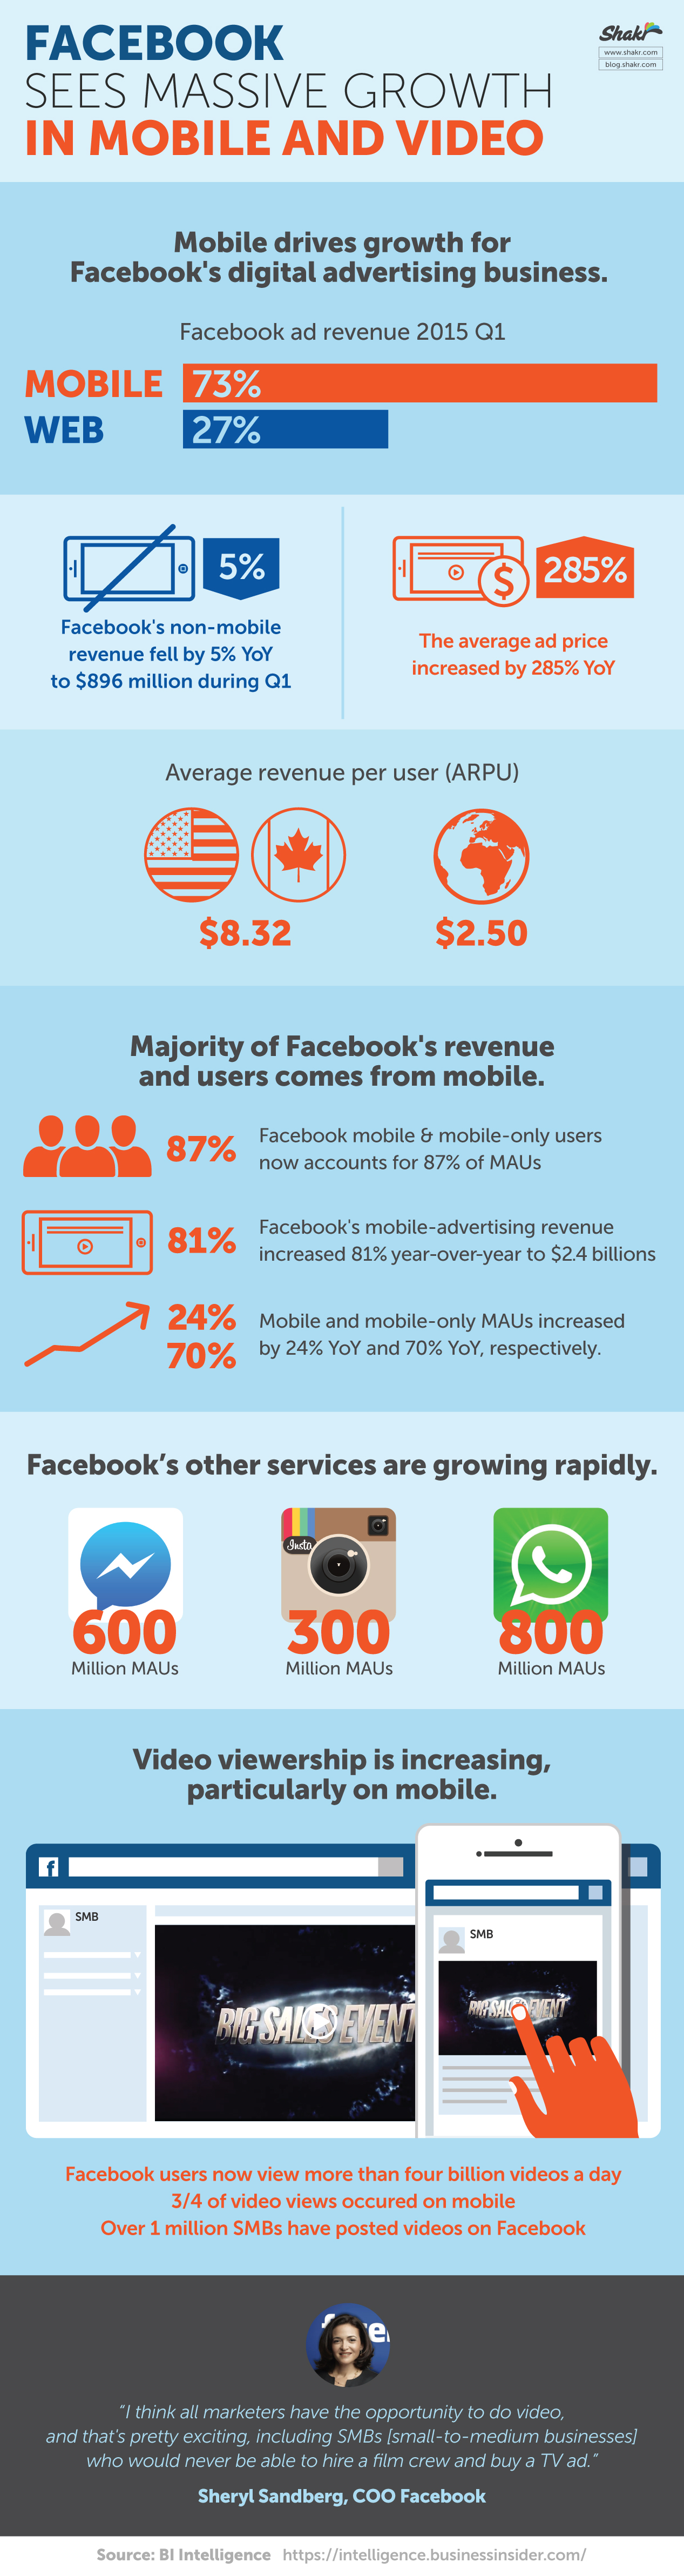 facebook mobile and video growth